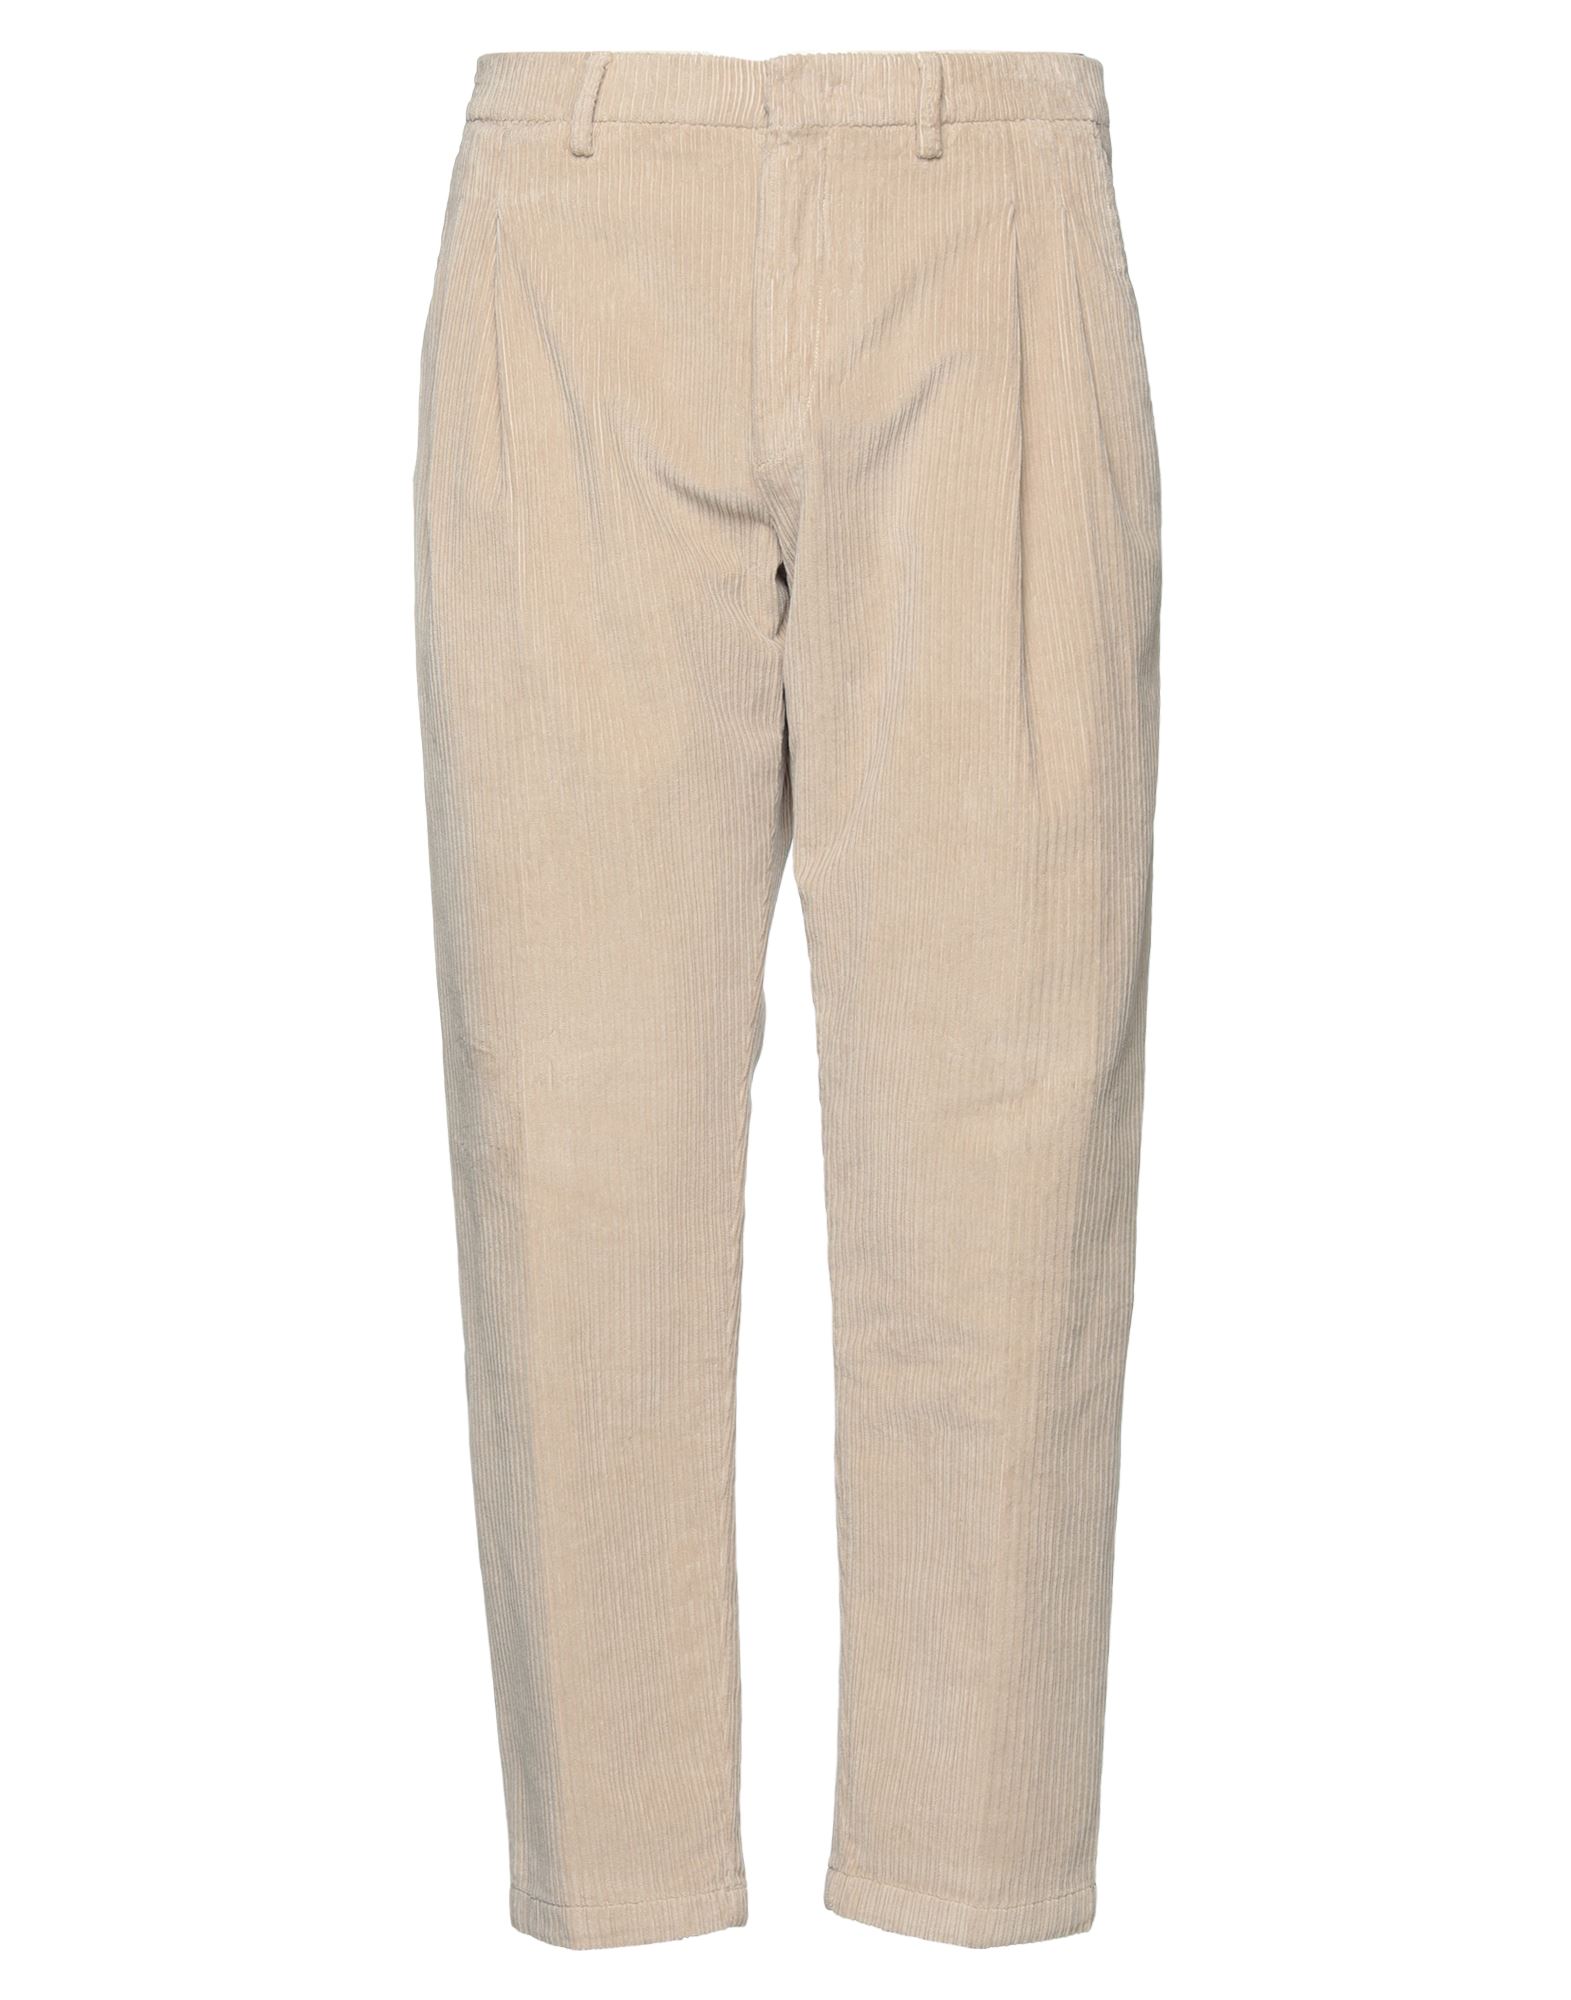 BE ABLE BE ABLE MAN PANTS BEIGE SIZE 40 COTTON, ELASTANE